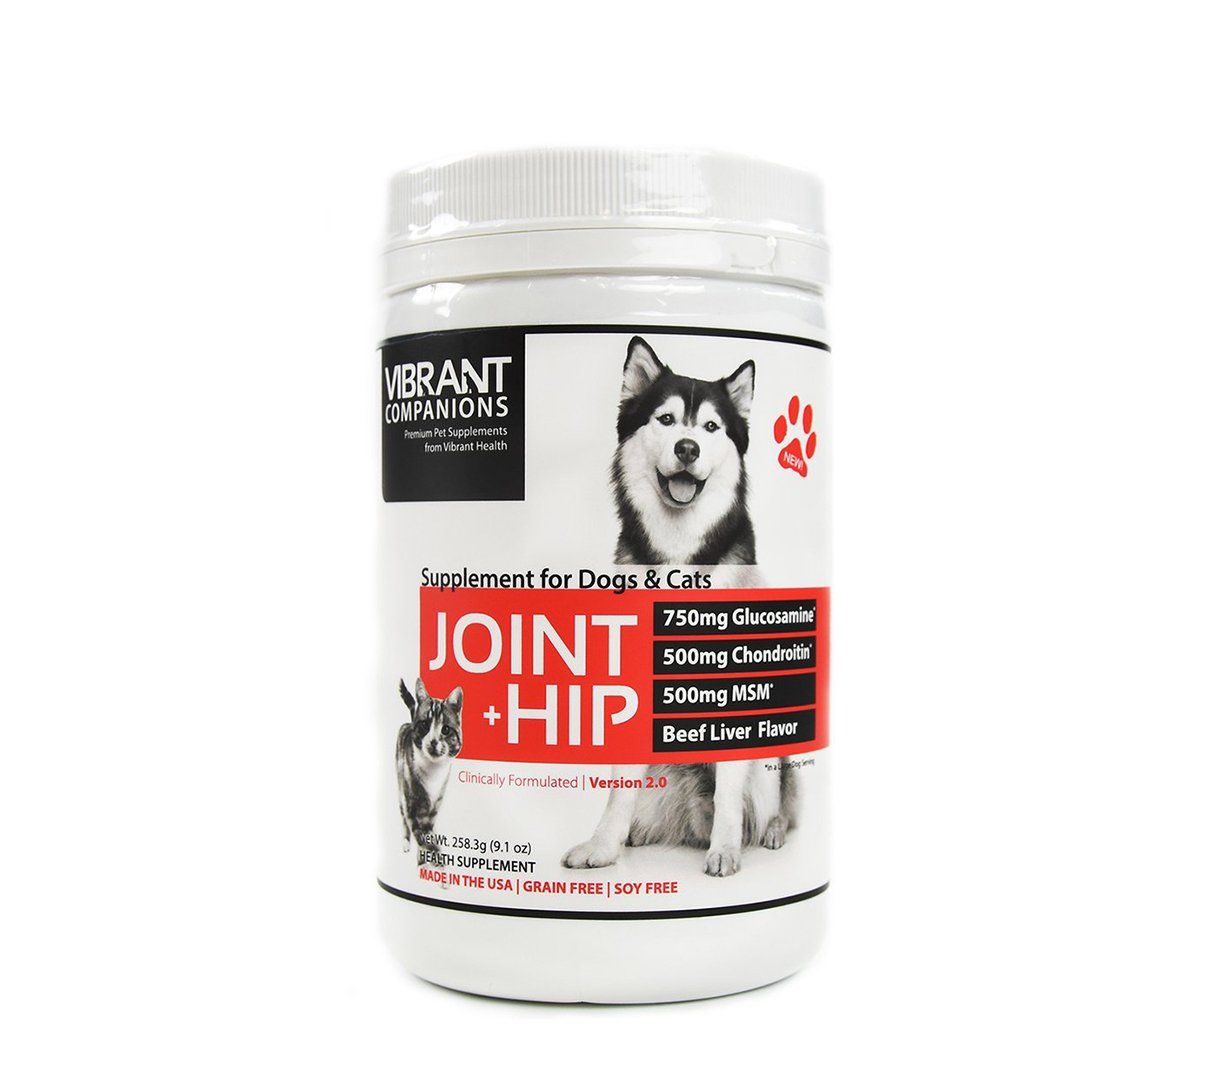 Vibrant Health Pet joint and hip supplement